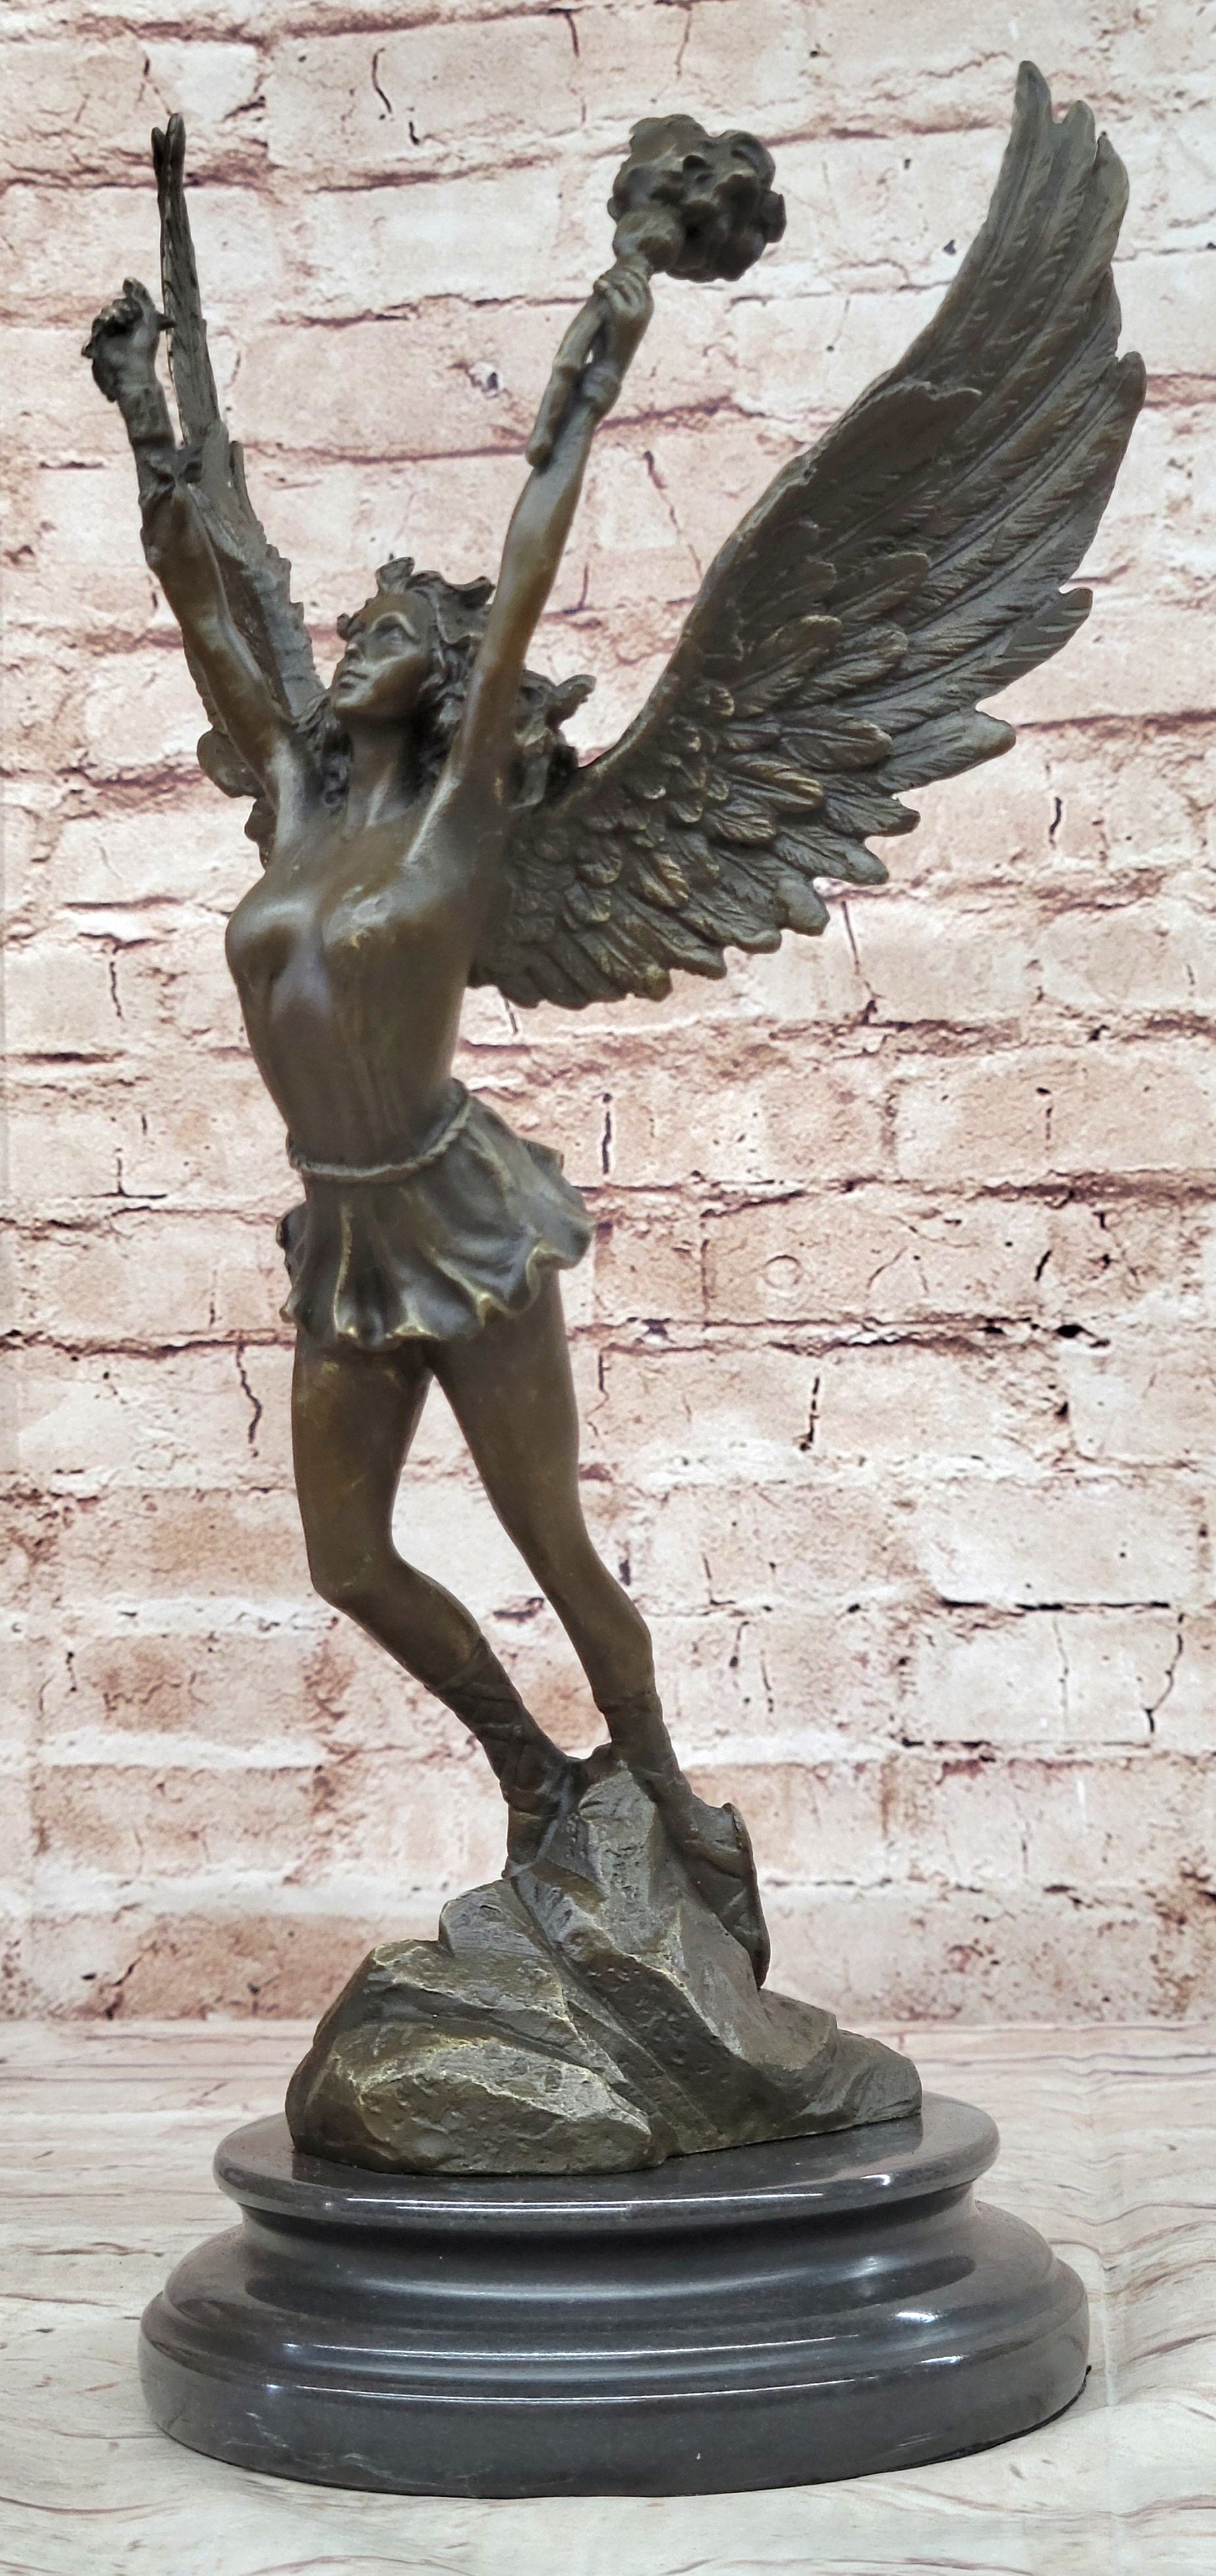 Handcrafted bronze sculpture SALE Mythical Religious Angel Moreau Signed Nude